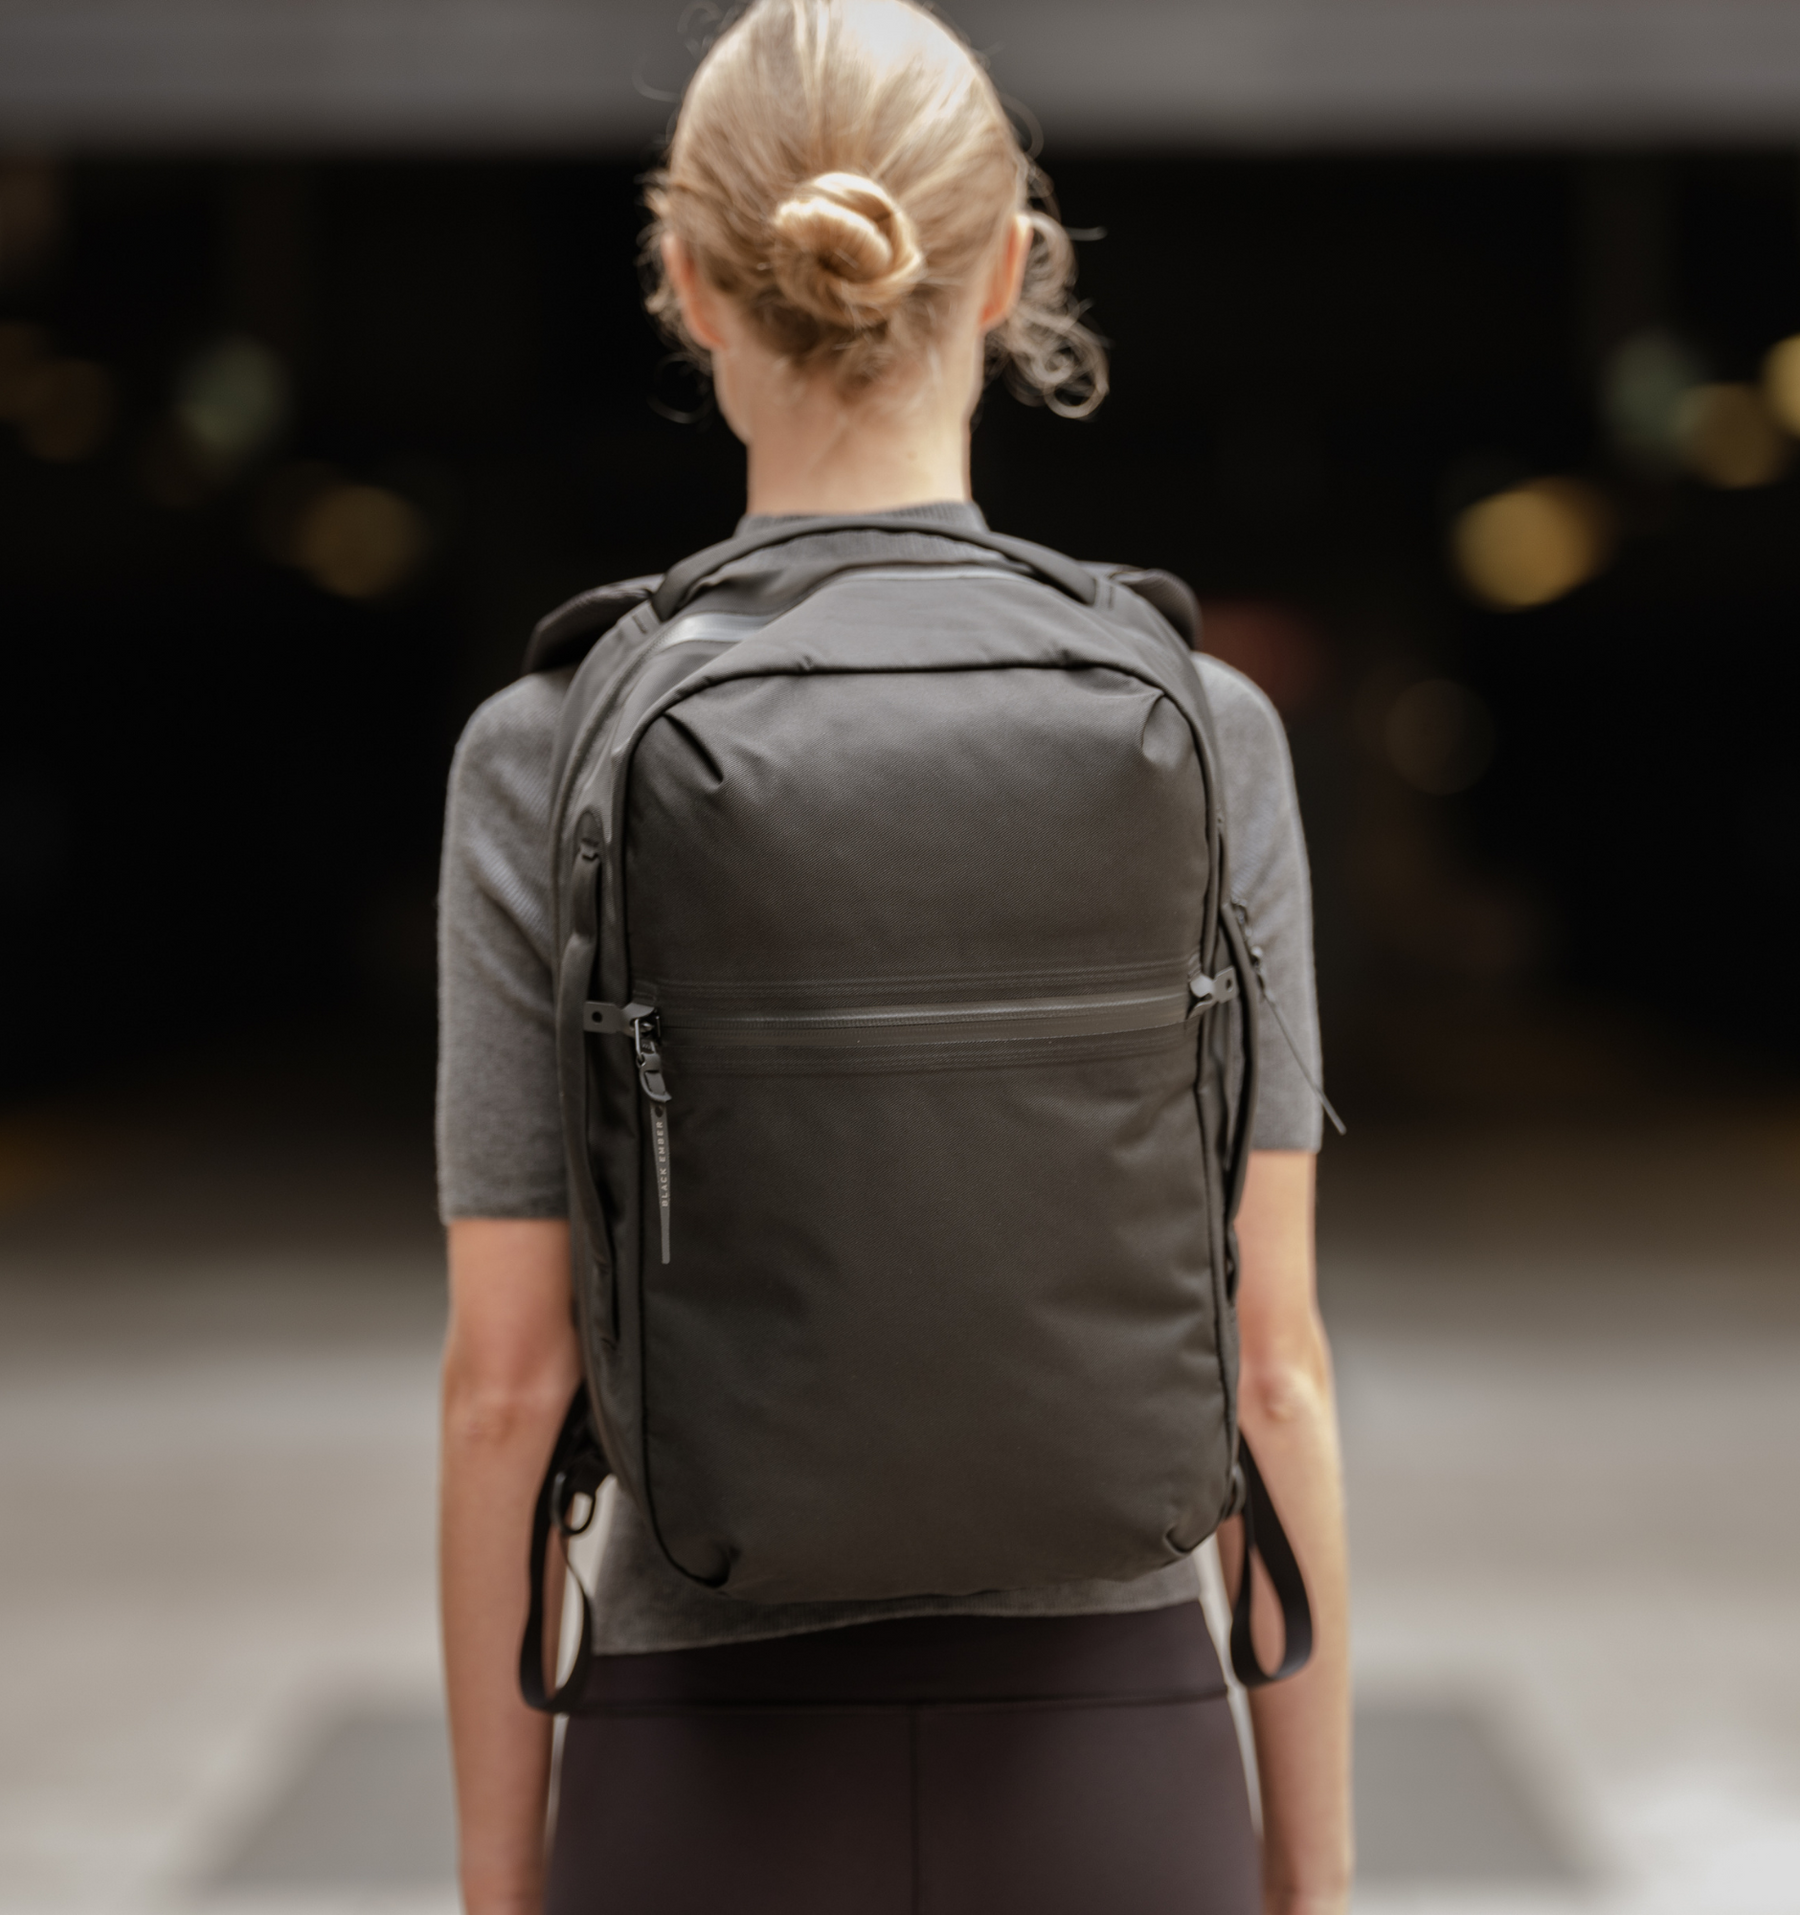 The Black Ember Shadow Backpack - Technical, Sophisticated Yet Brilliantly Simple